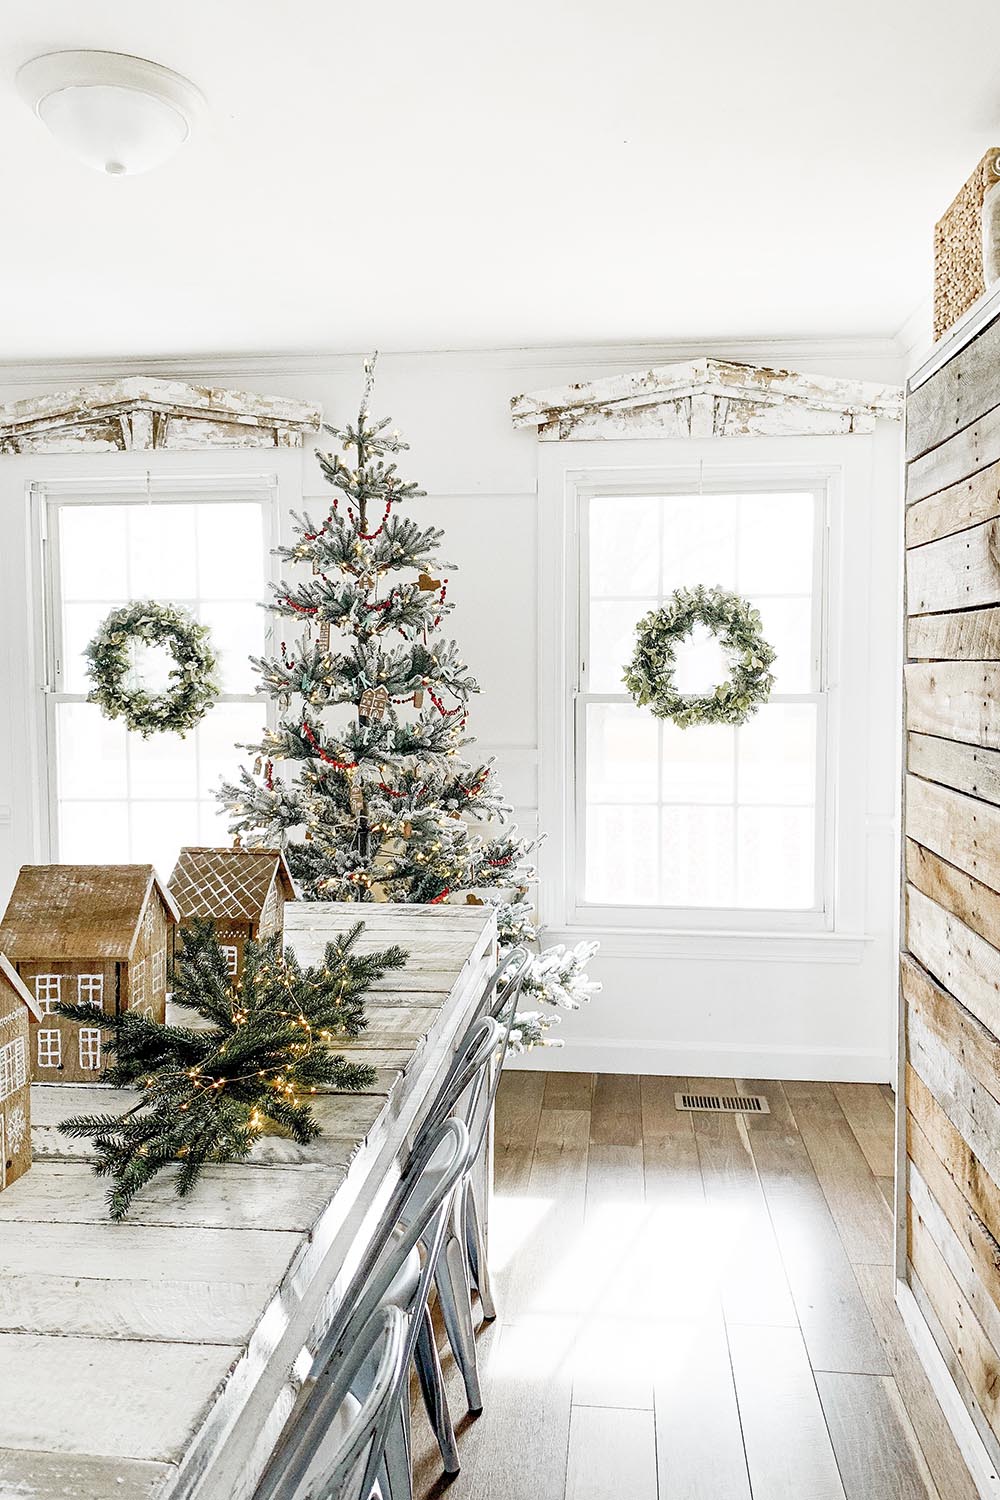 Dining room with Christmas tree and reef decor